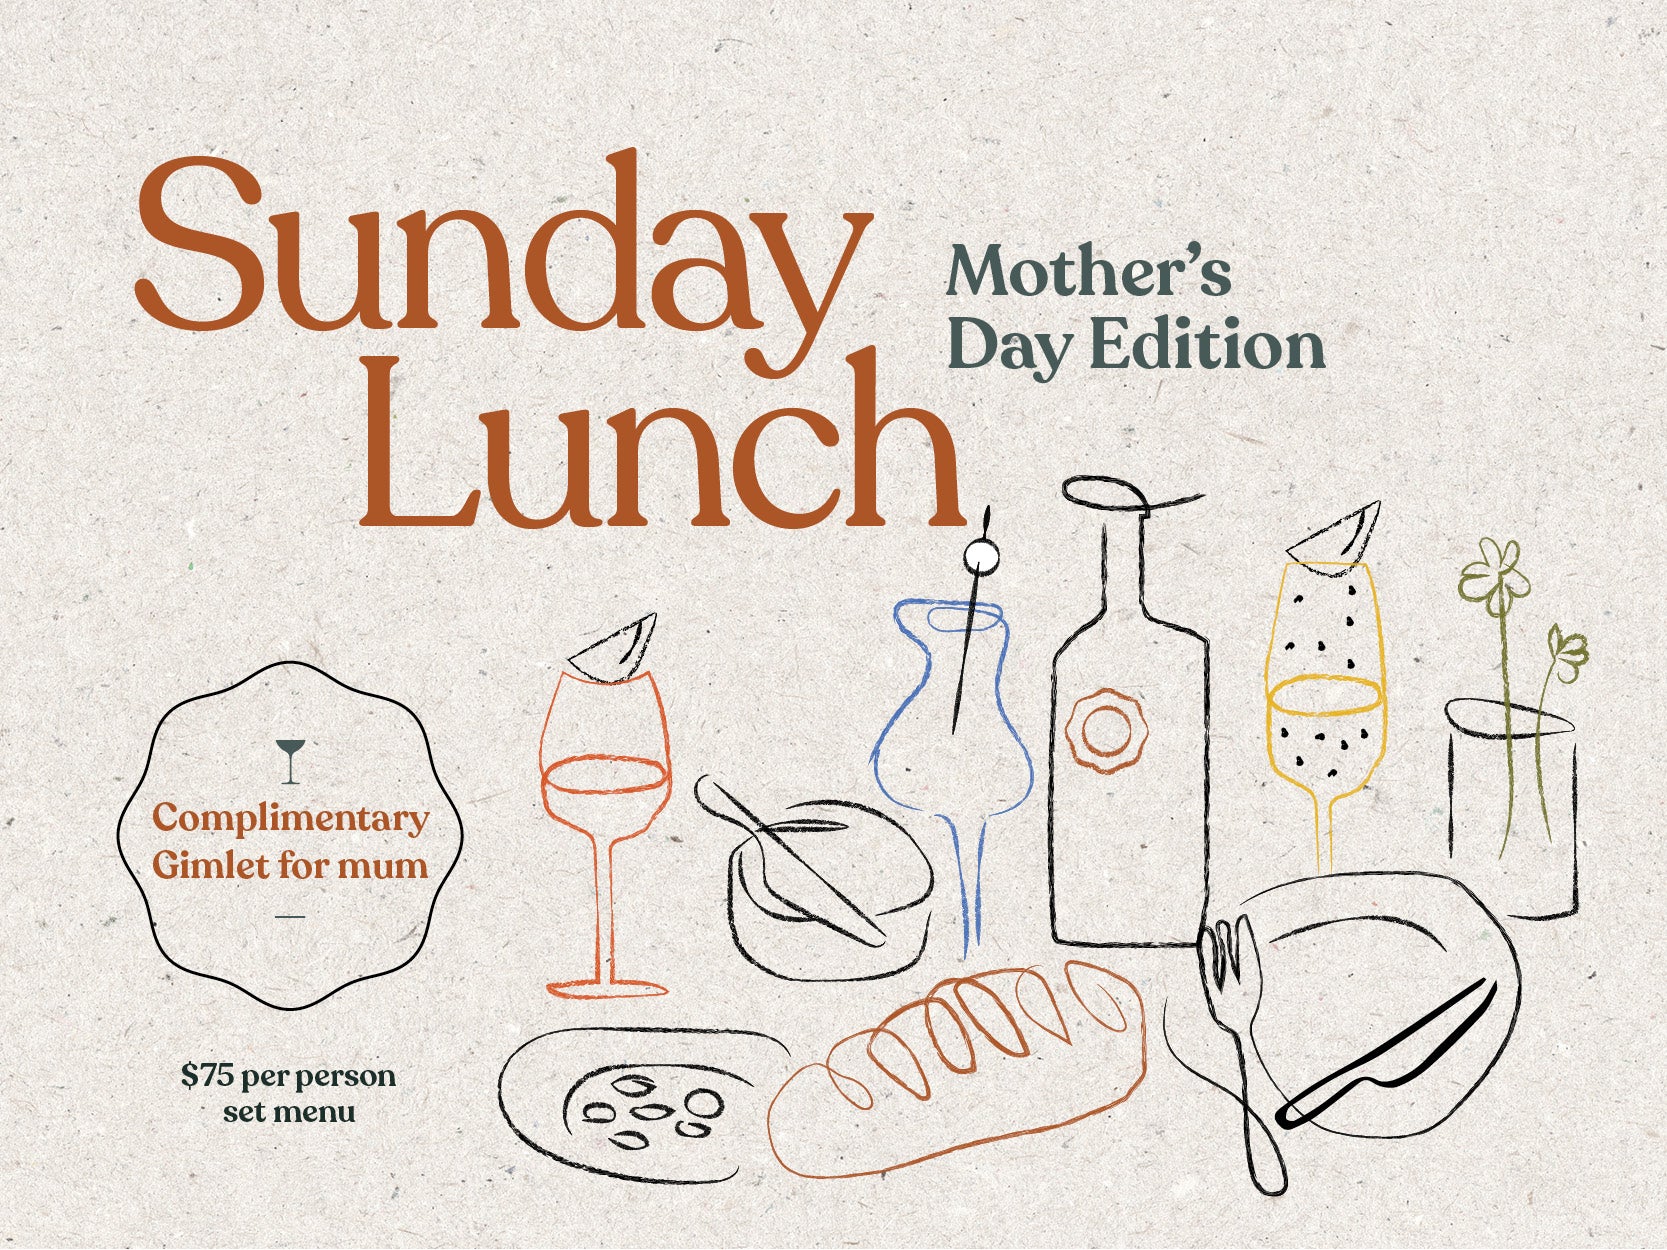 Mother's Day in Fremantle